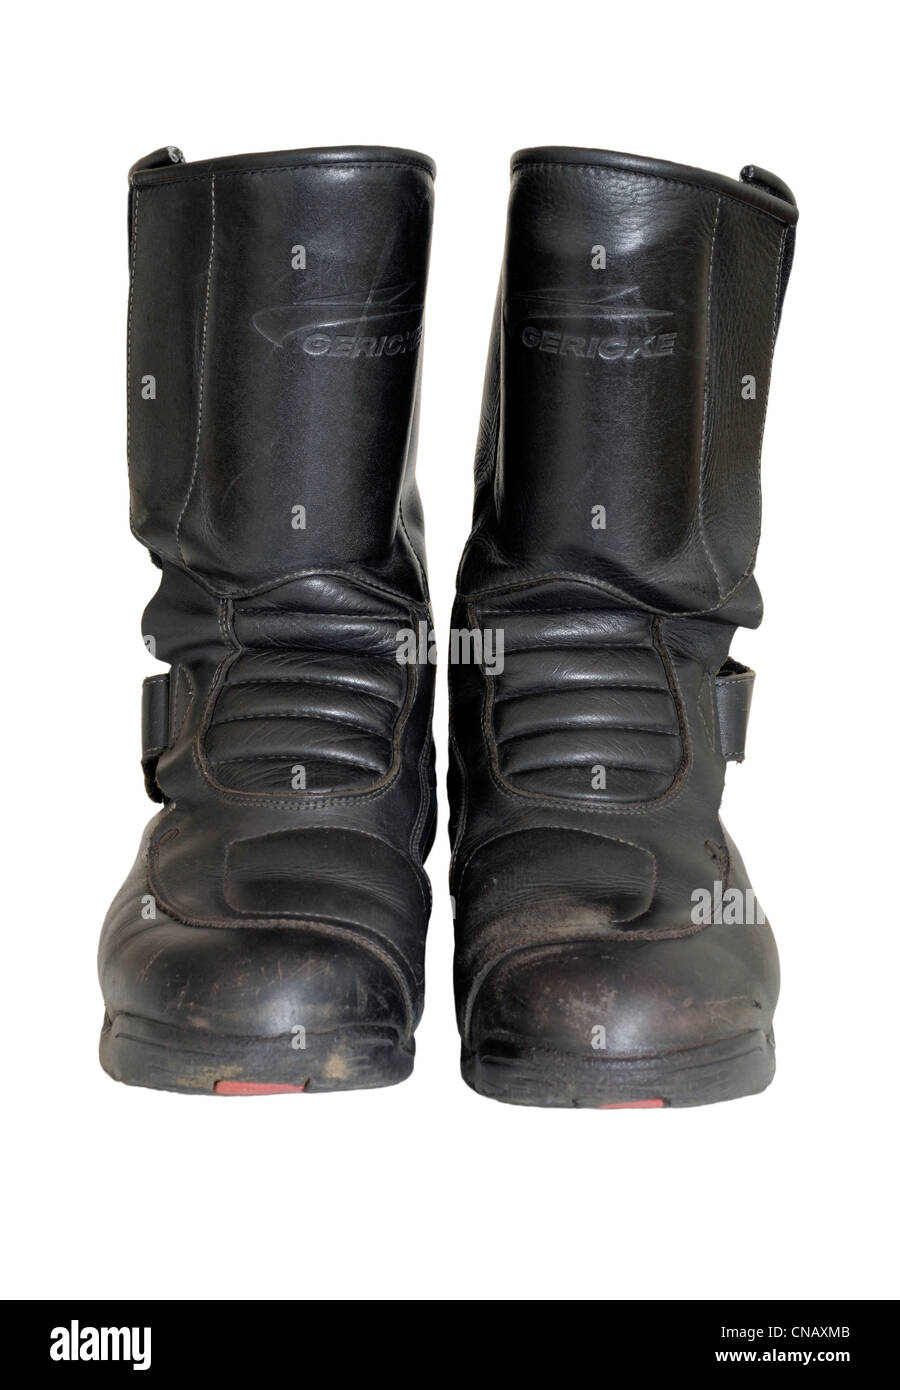 Biker Boots on a White Background Stock Photo